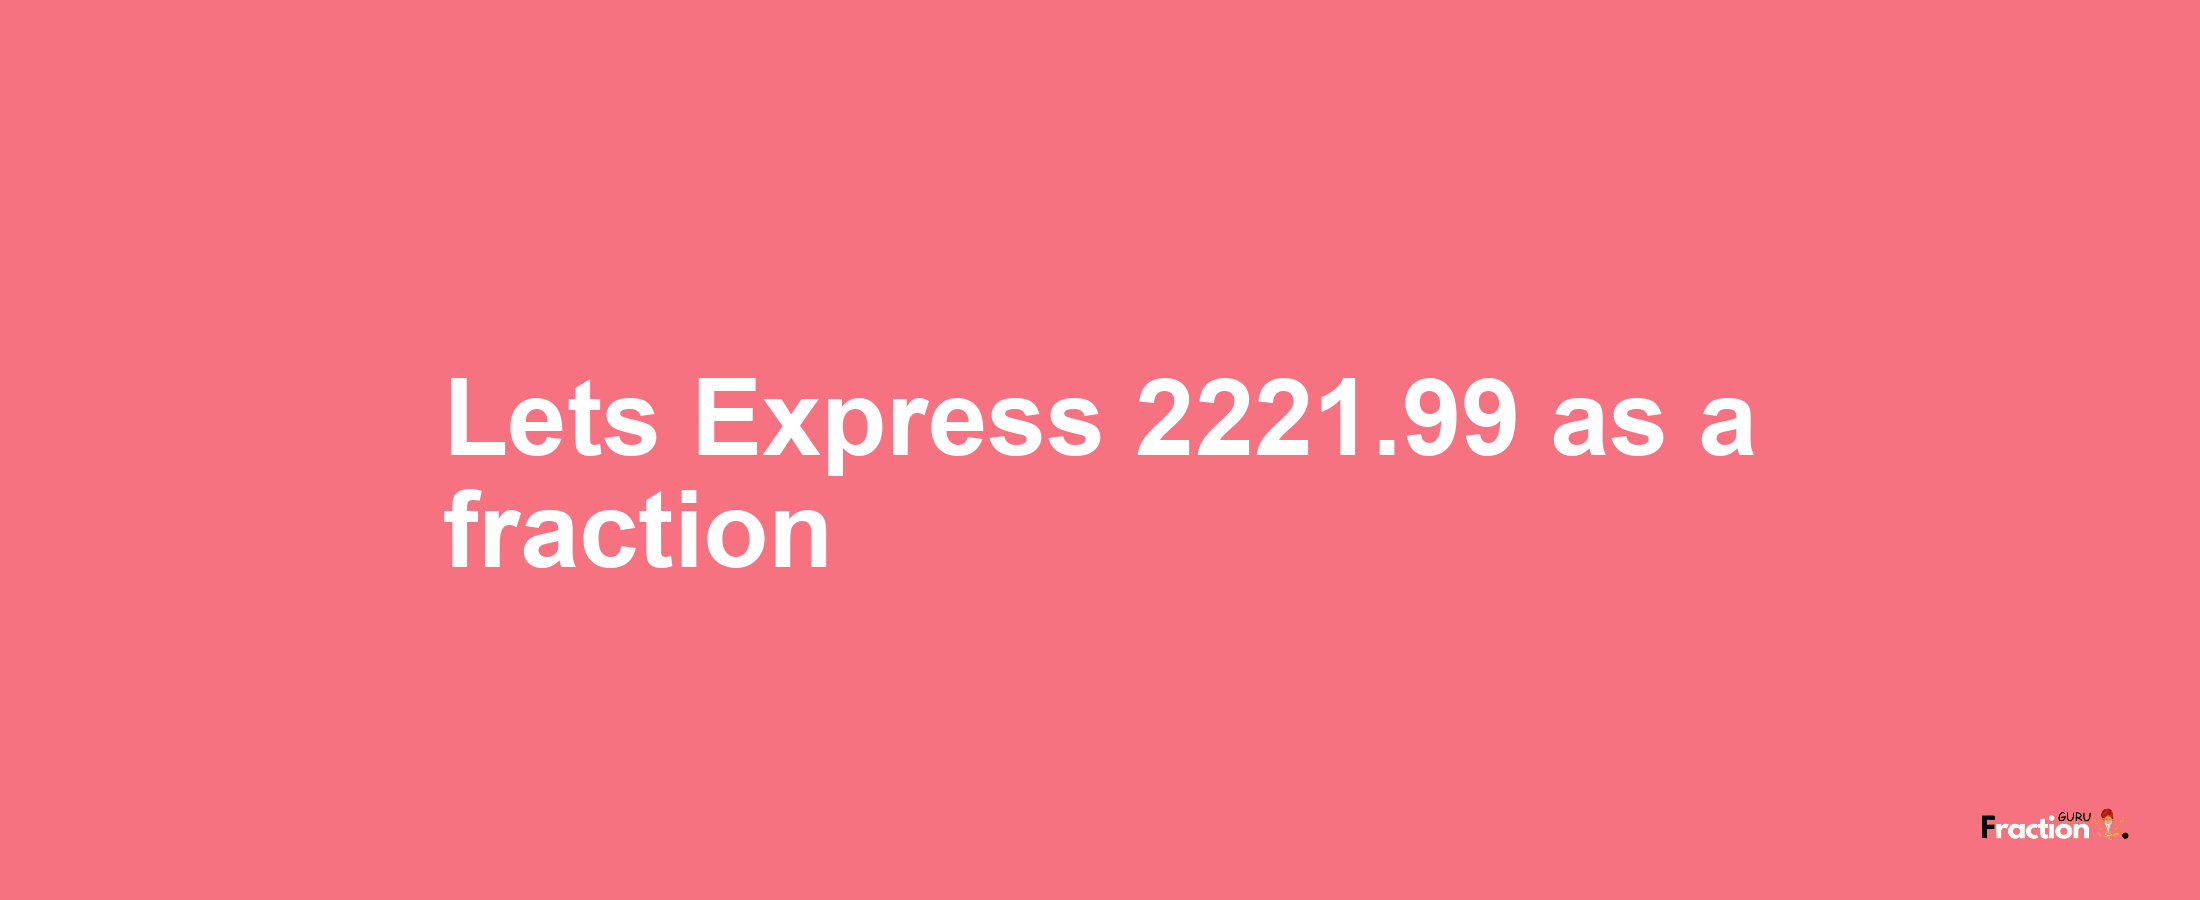 Lets Express 2221.99 as afraction